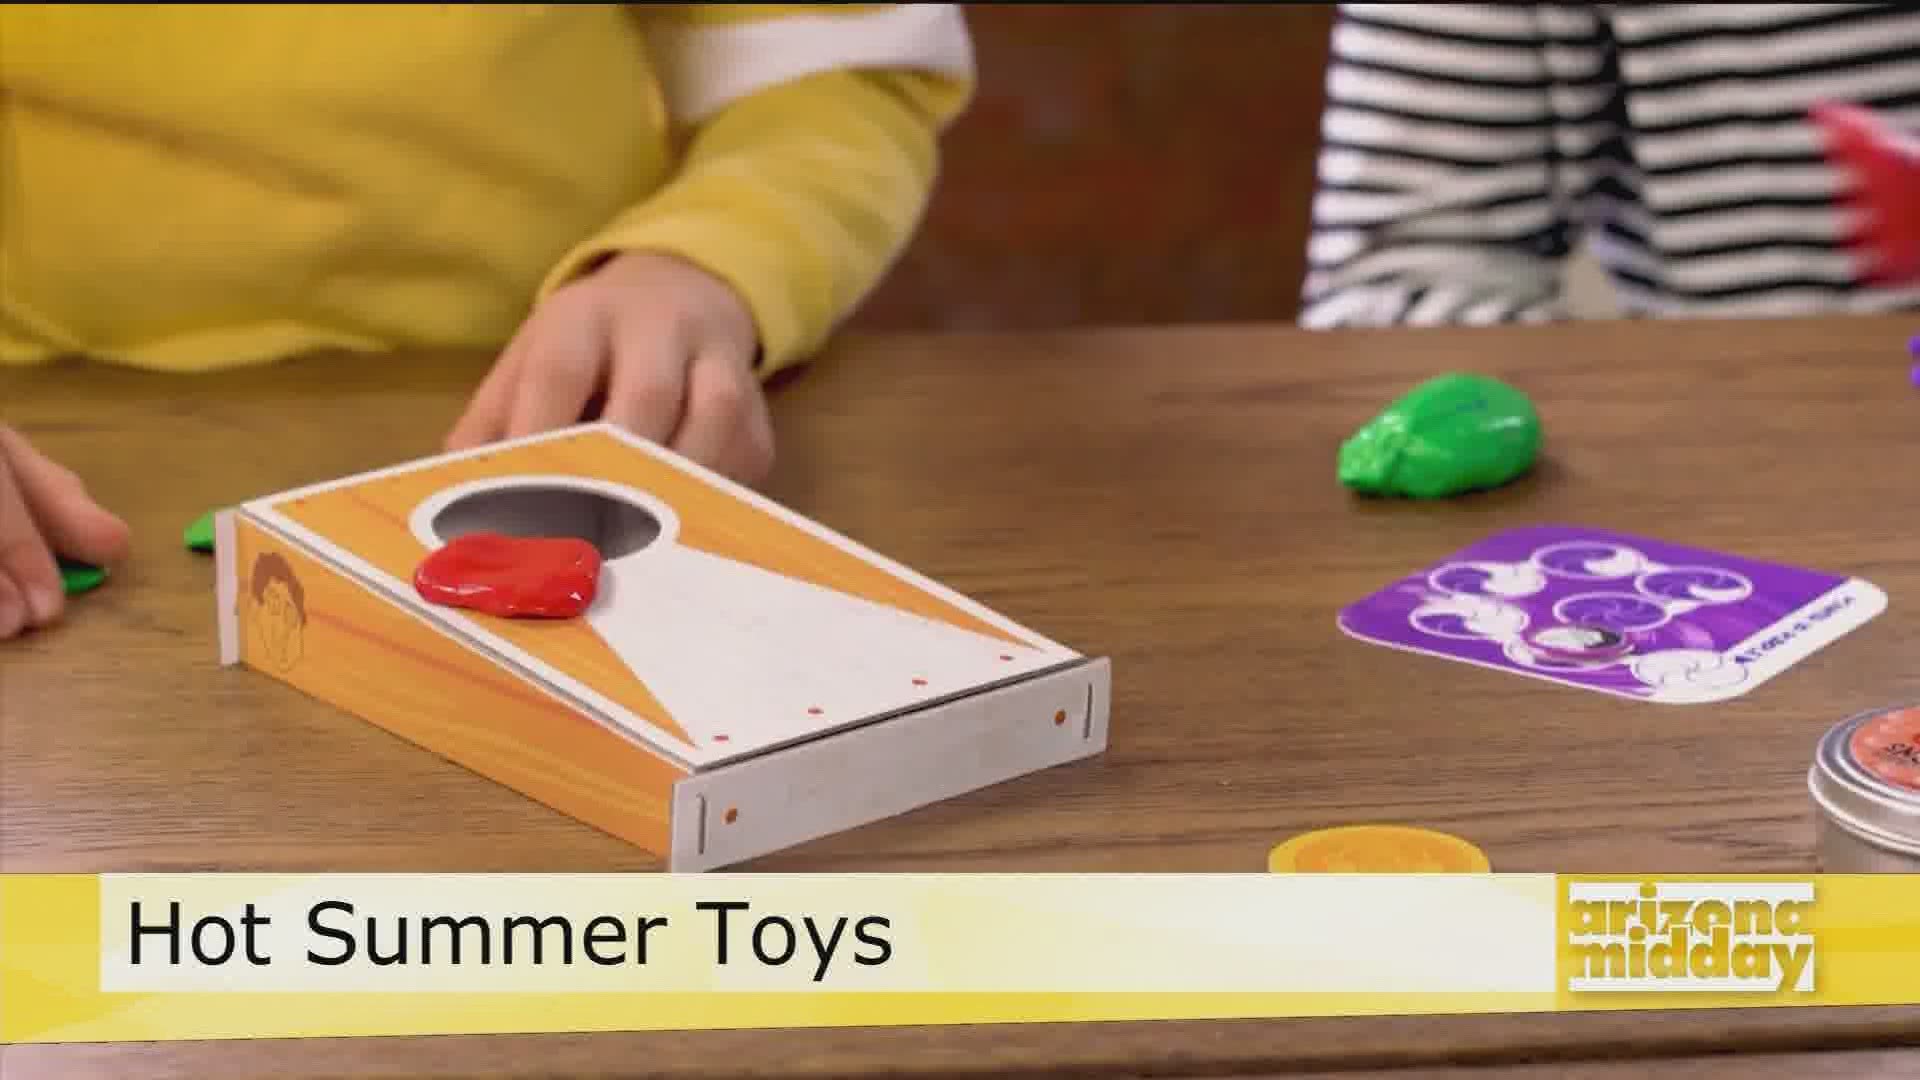 Adrienne Appell with The Toy Association shows us some of the hottest trending toys this season and where you can check them out virtually!